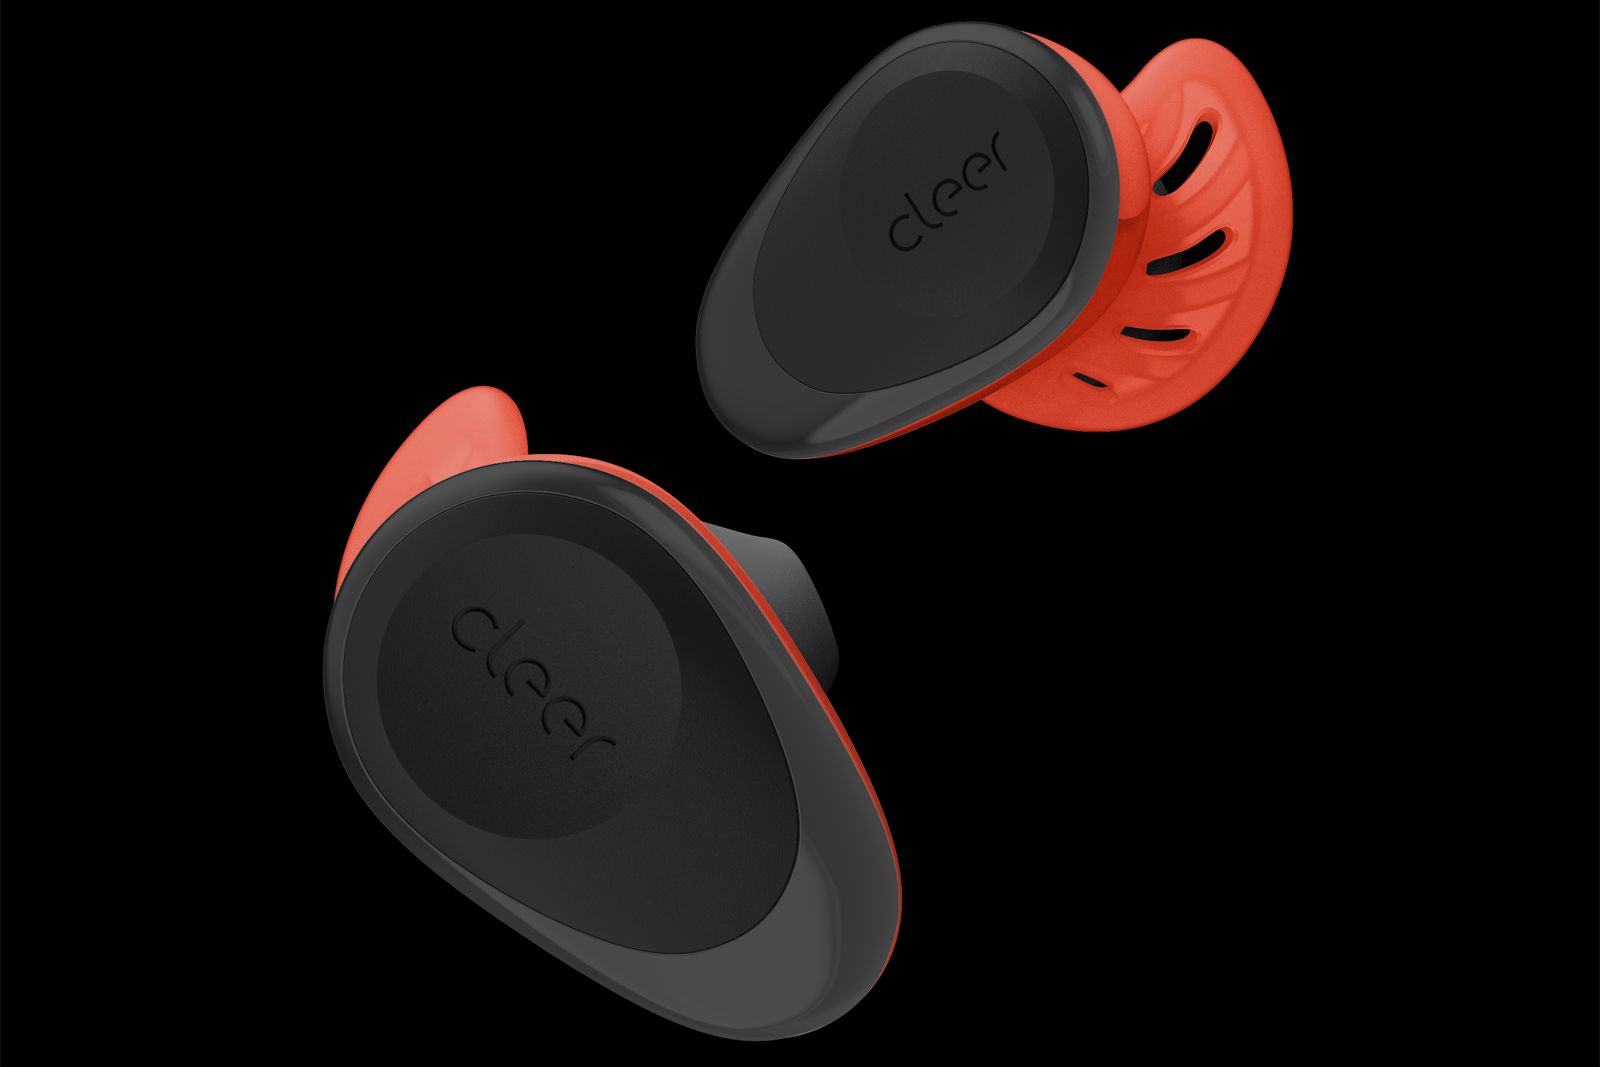 Cleer Goal are a pair of true wireless sport headphones with Google Assistant image 1